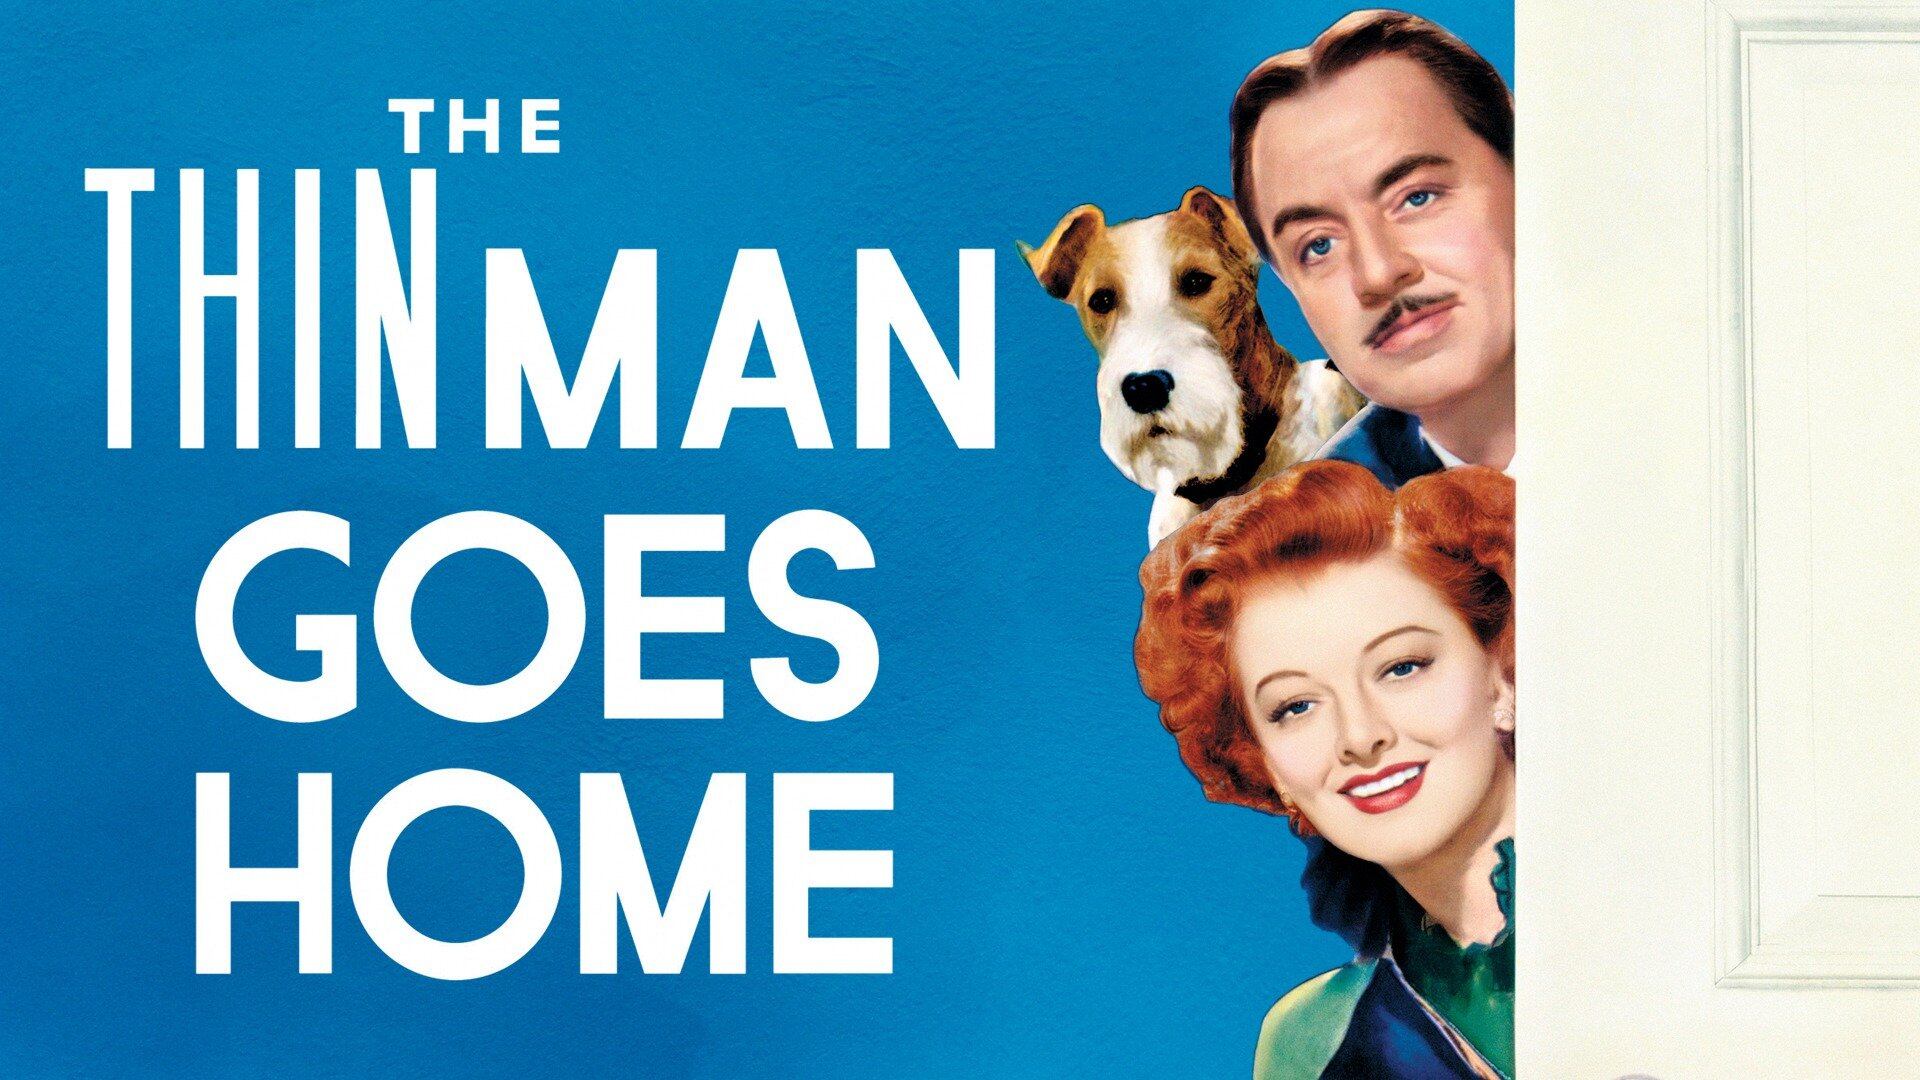 30-facts-about-the-movie-the-thin-man-goes-home